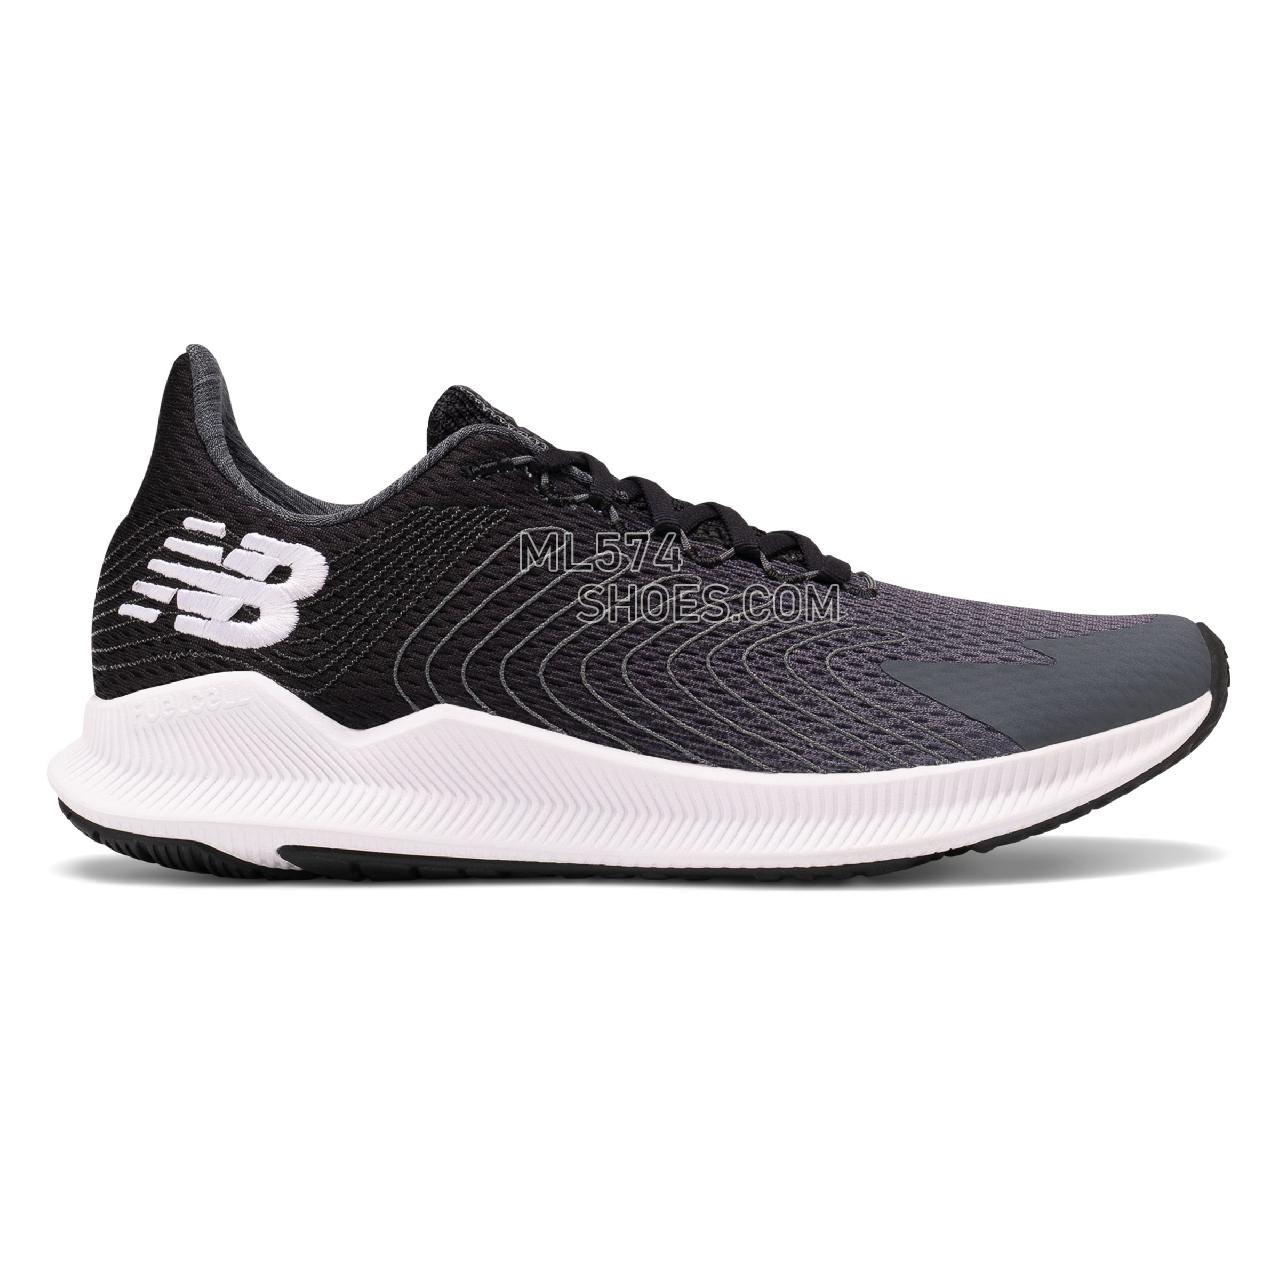 New Balance FuelCell Propel - Men's Neutral Running - Lead with Black and White - MFCPRLB1